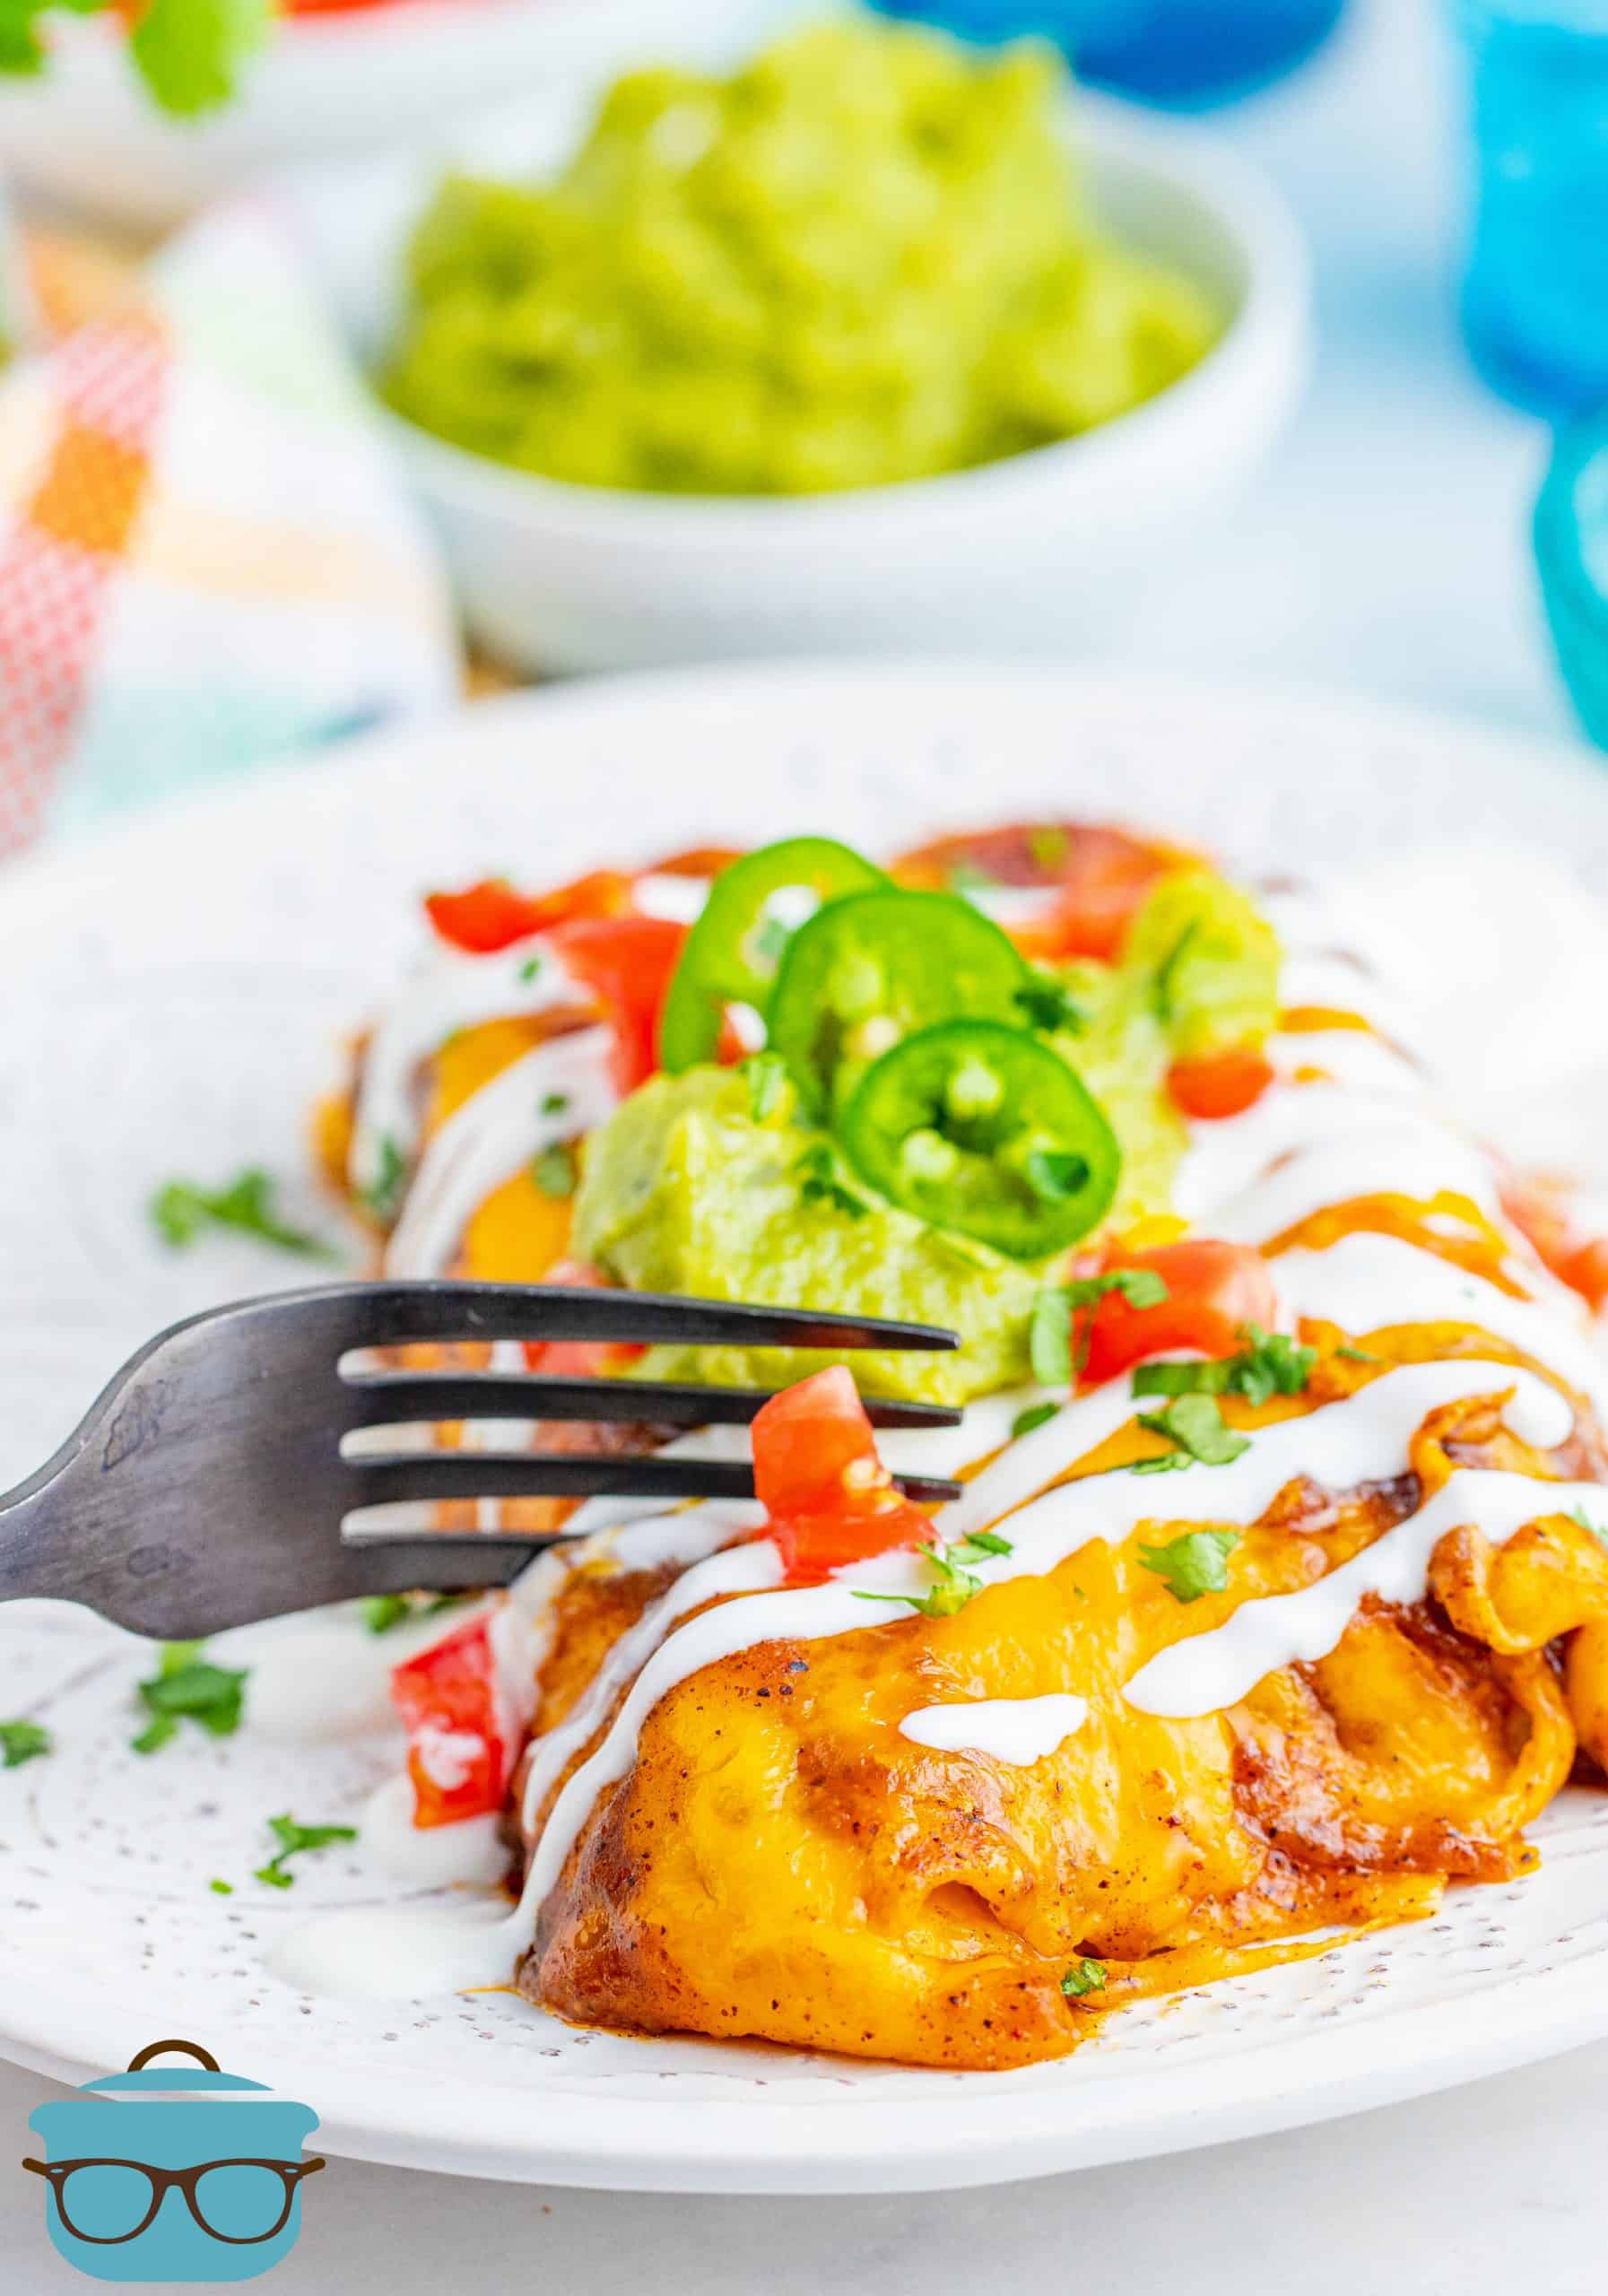 two enchiladas on a white plate with a fork slicing through one of the enchiladas.